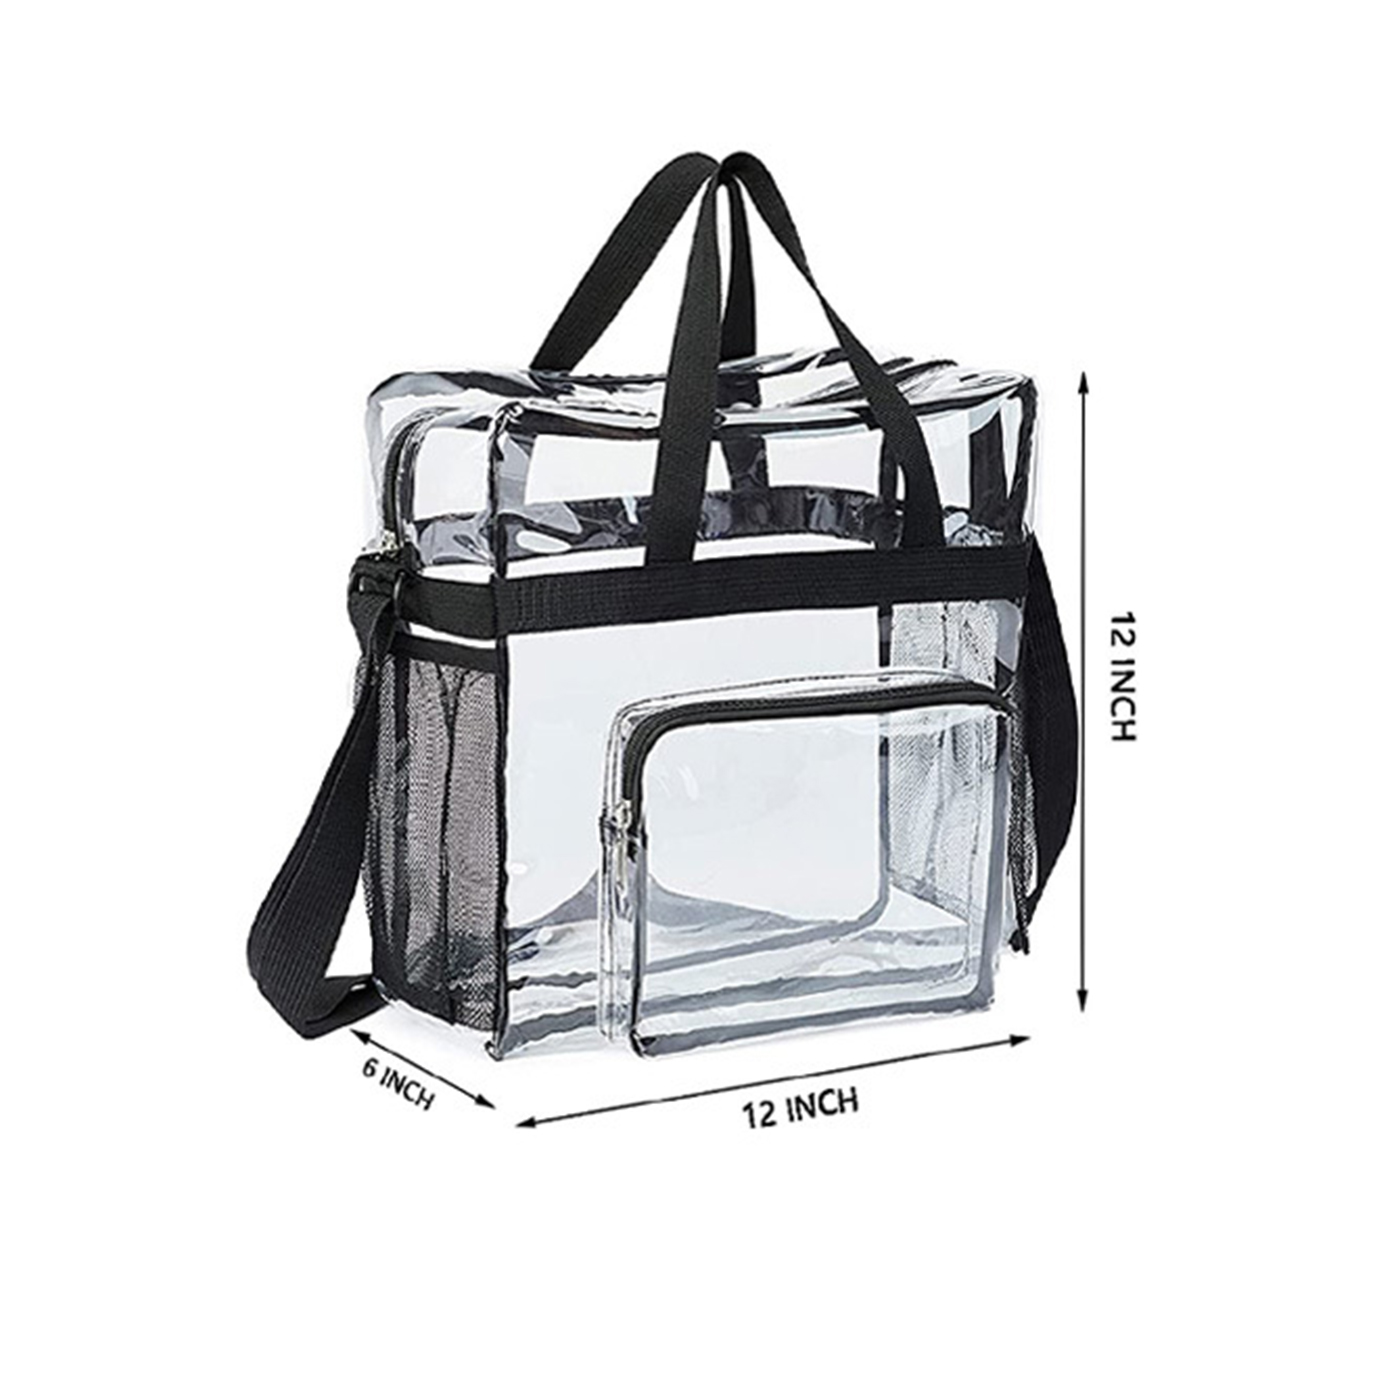 Large Capacity Clear Bag With Shoulder Strap3